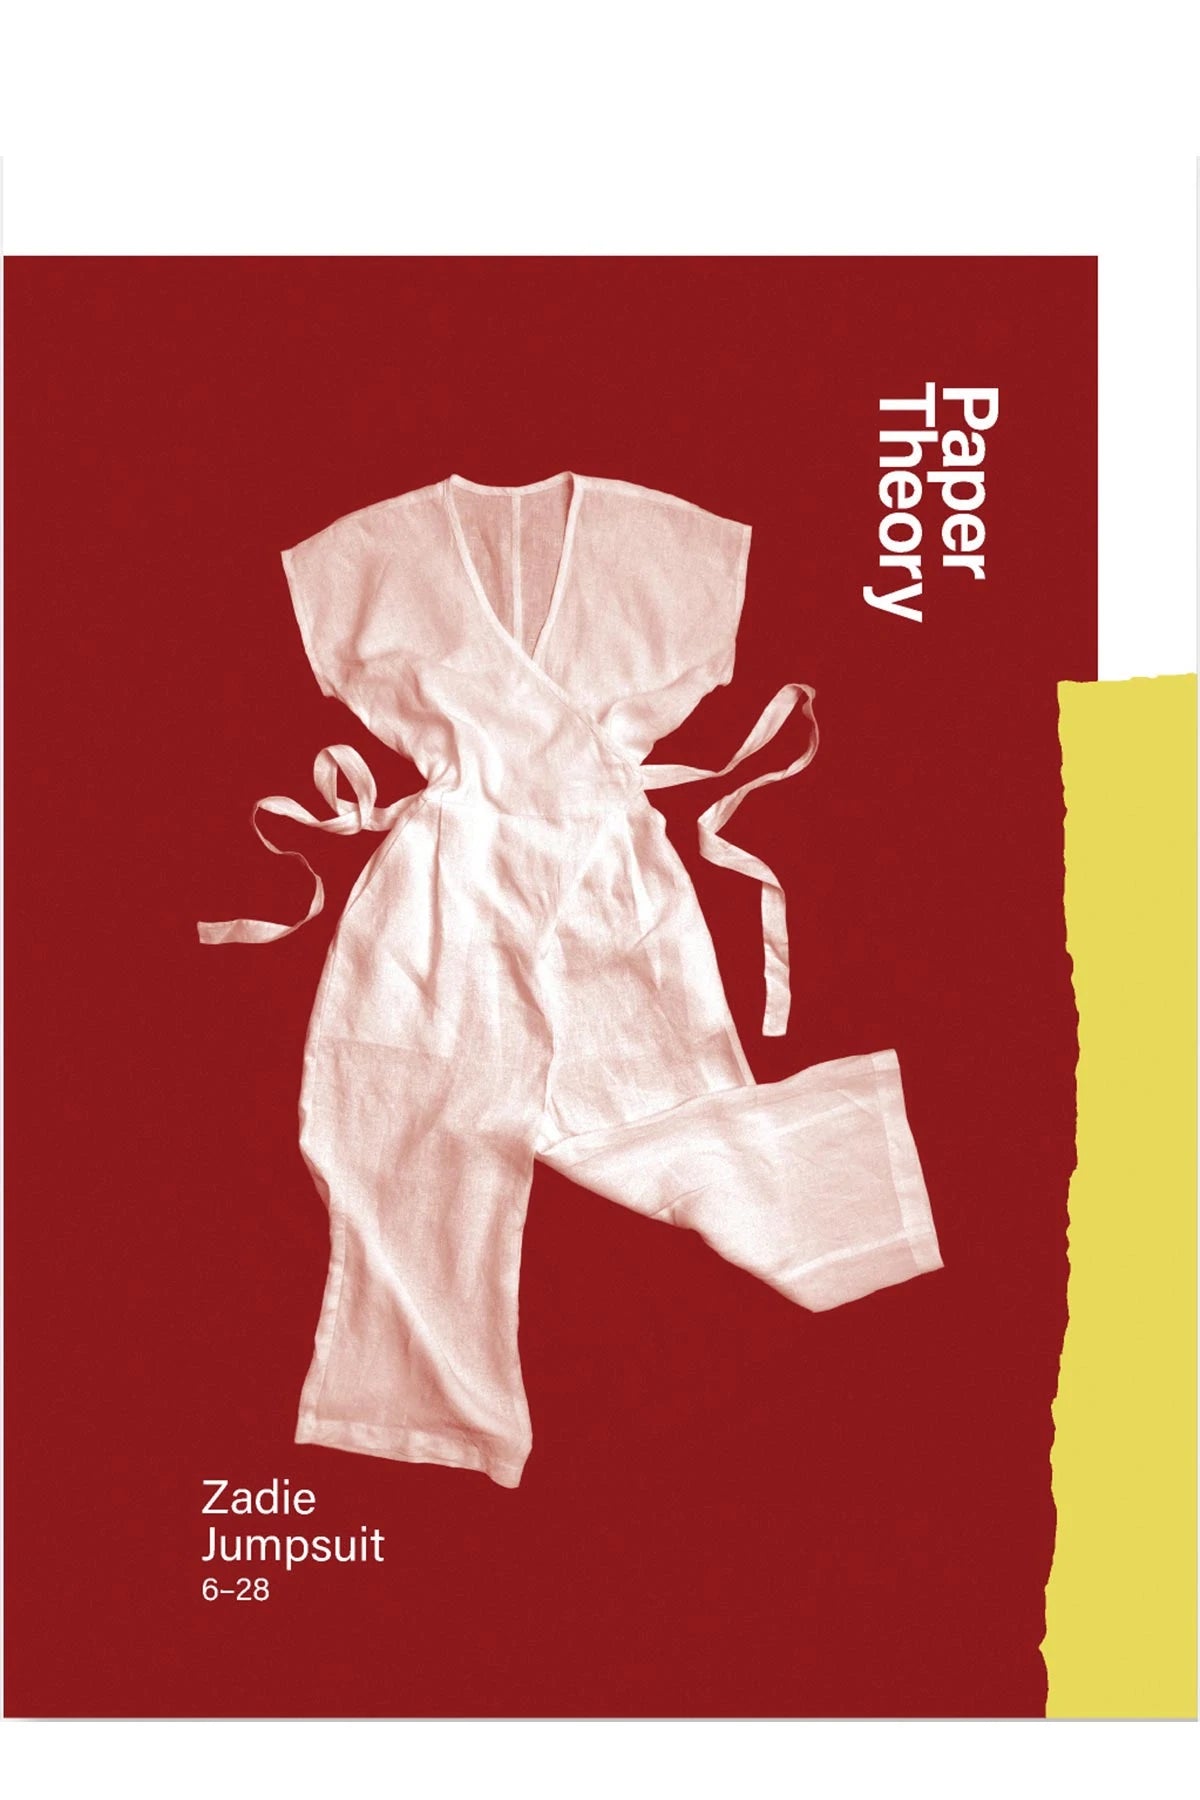 Zadie Jumpsuit - Paper pattern - Paper Theory